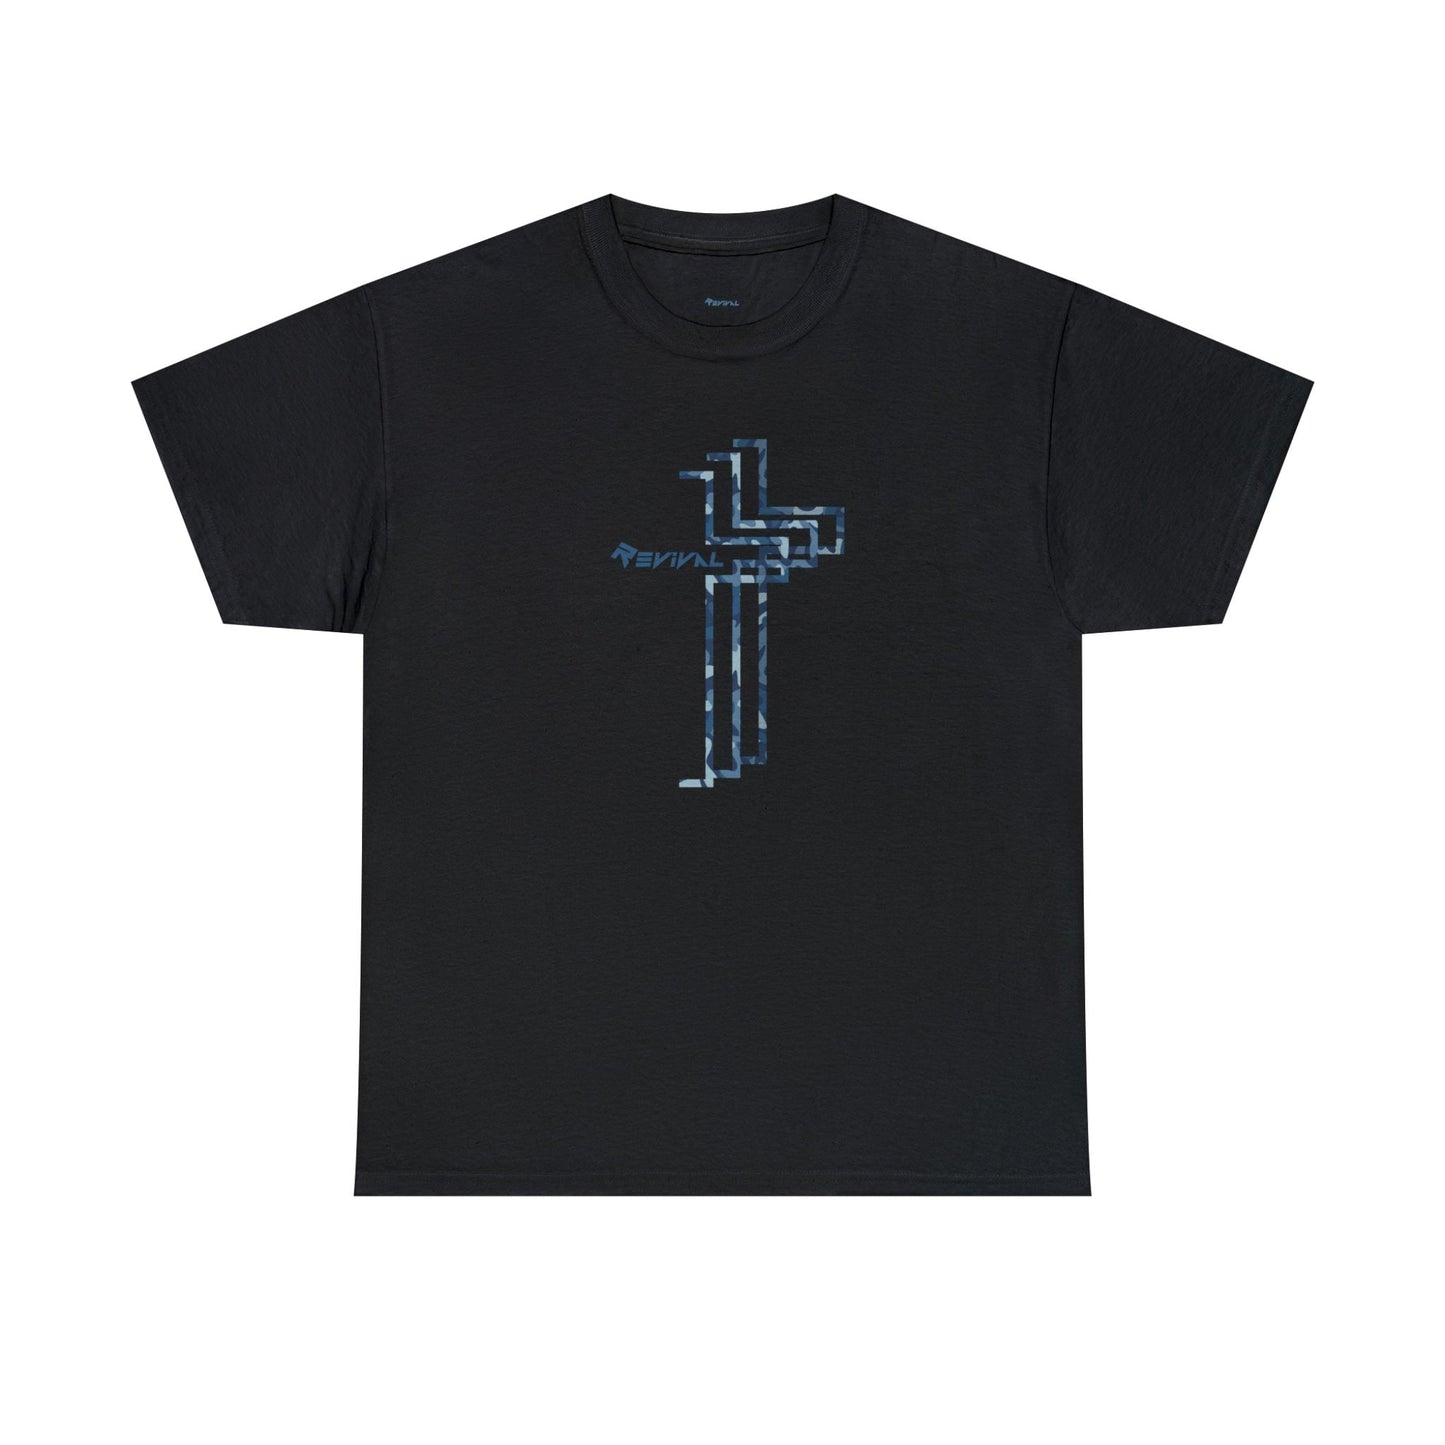 Carbon Camo Calvary Intersection by Revival Cotton T-Shirt, Women's and Men's Tee, Camouflage T-Shirt